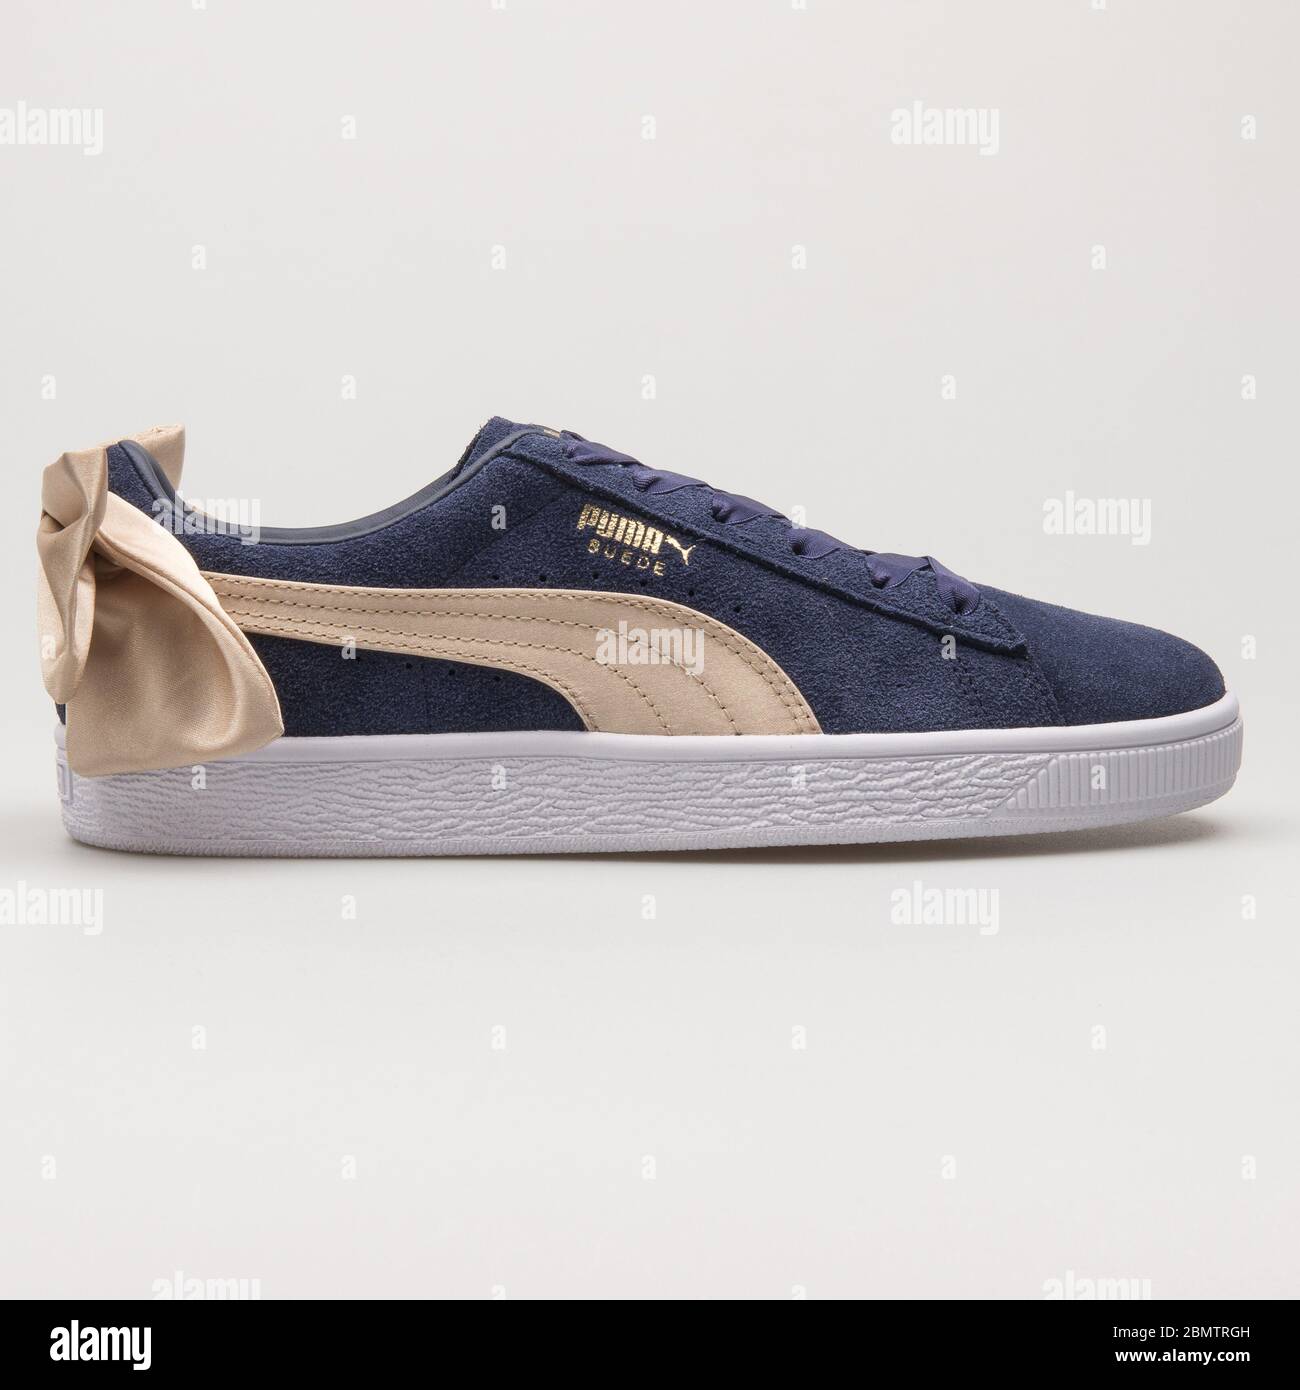 VIENNA, AUSTRIA - MAY 27, 2018: Puma Suede Bow Varsity navy blue and gold  sneaker on white background Stock Photo - Alamy